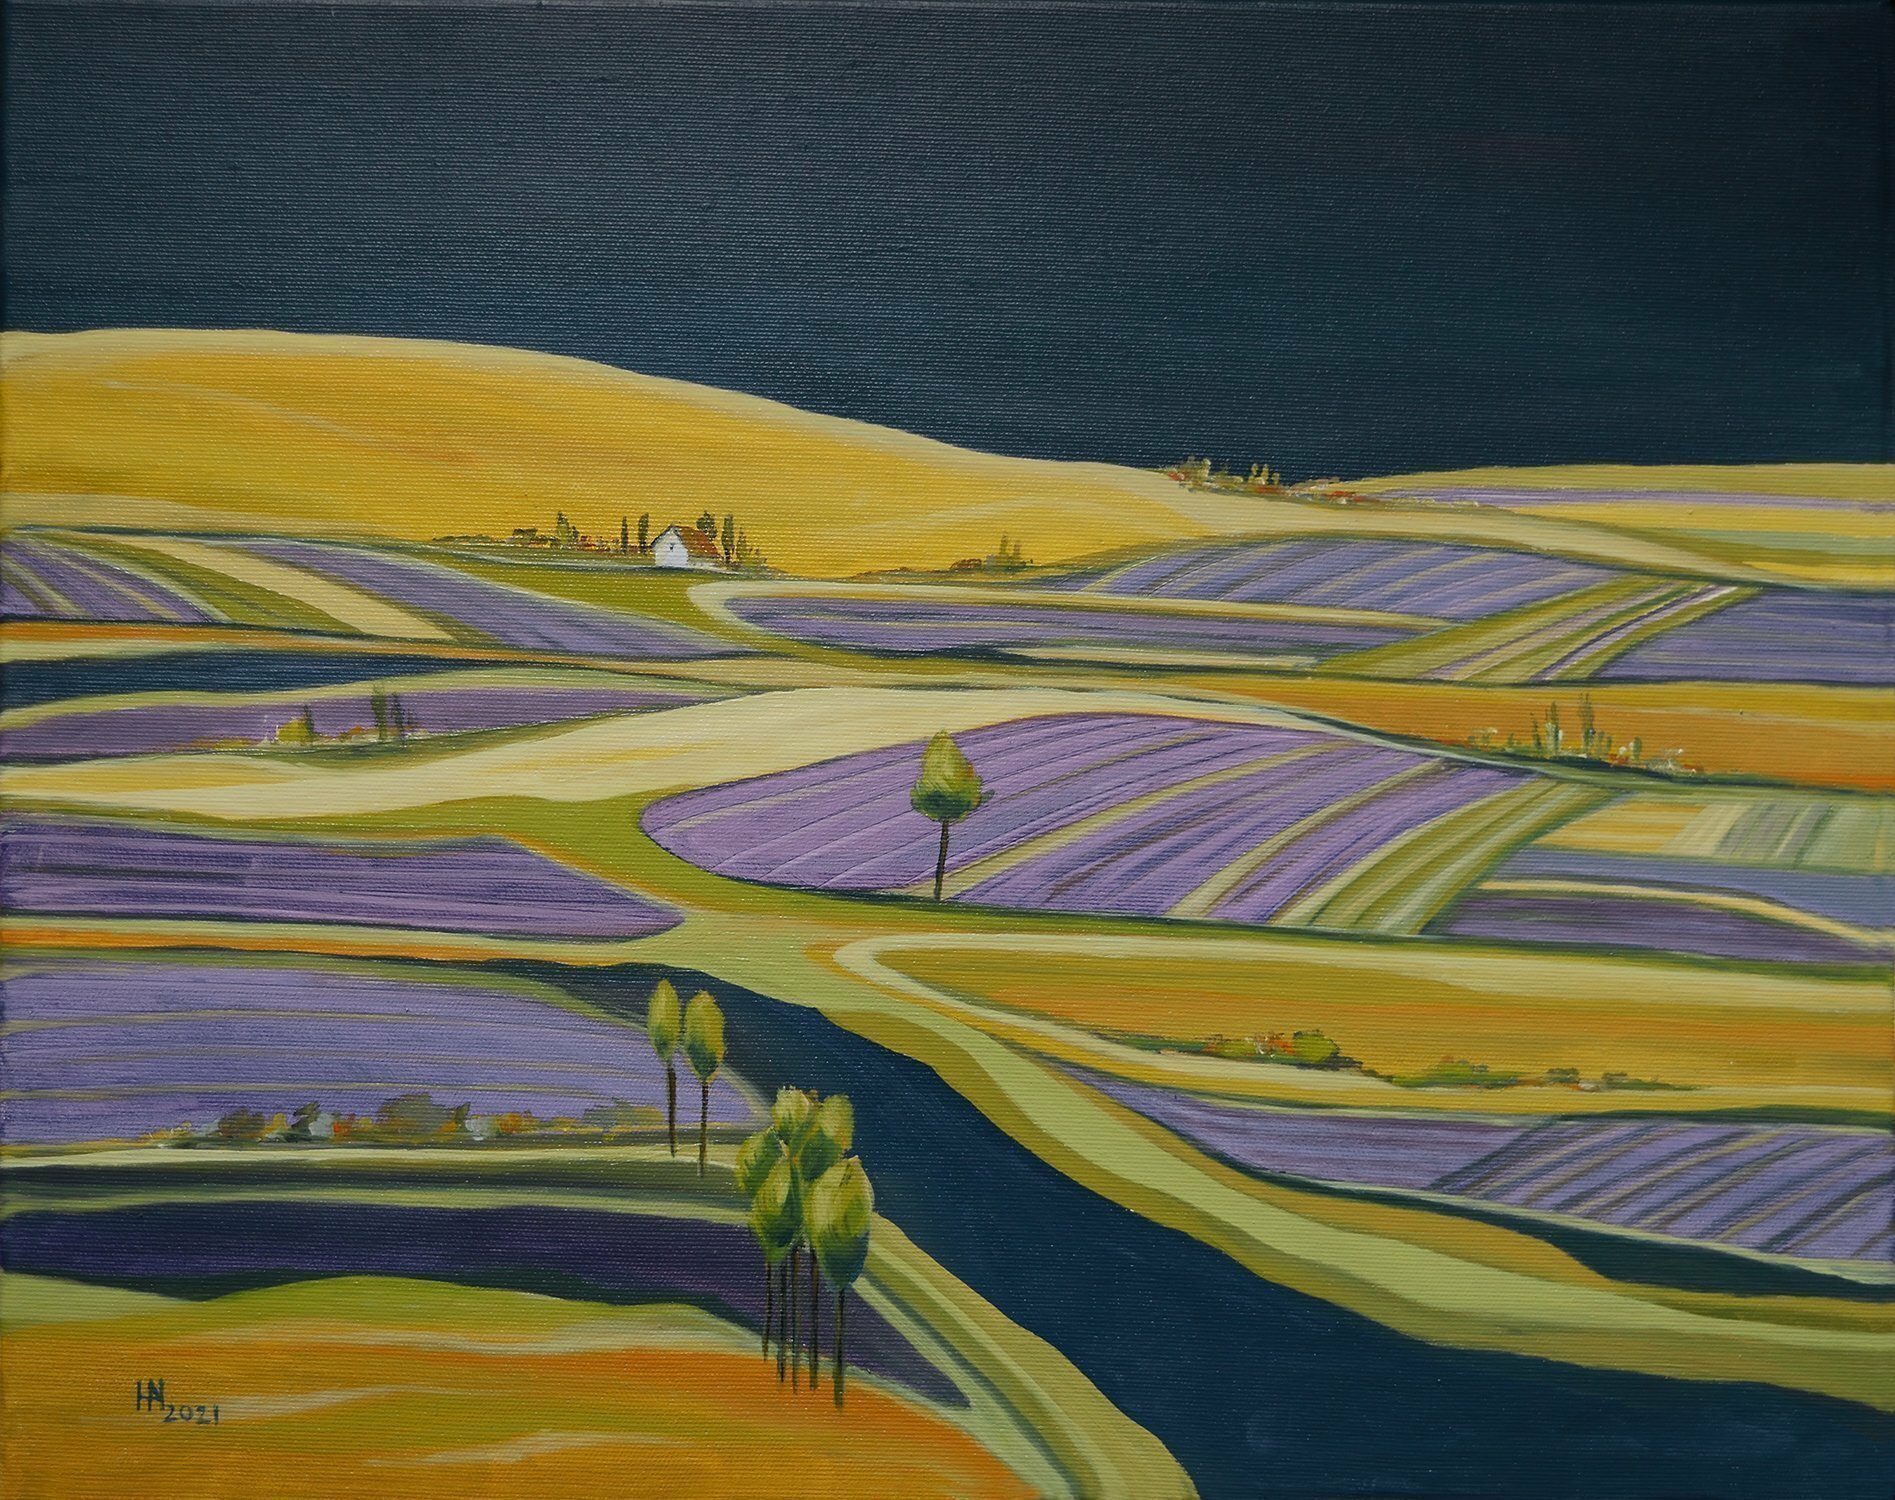 Aniko Hencz; The Lavender Farm, 2021, Original Painting Other, 20 x 16 inches. Artwork description: 241 Original semi- abstract painting with a house on a lavender farm.  It is an imaginary rural landscape with trees, purple lavender flowers yellow and green fields surrounding the house.  The artwork is made with oil on canvas, it is signed in front+backand accompanied with a certificate ...